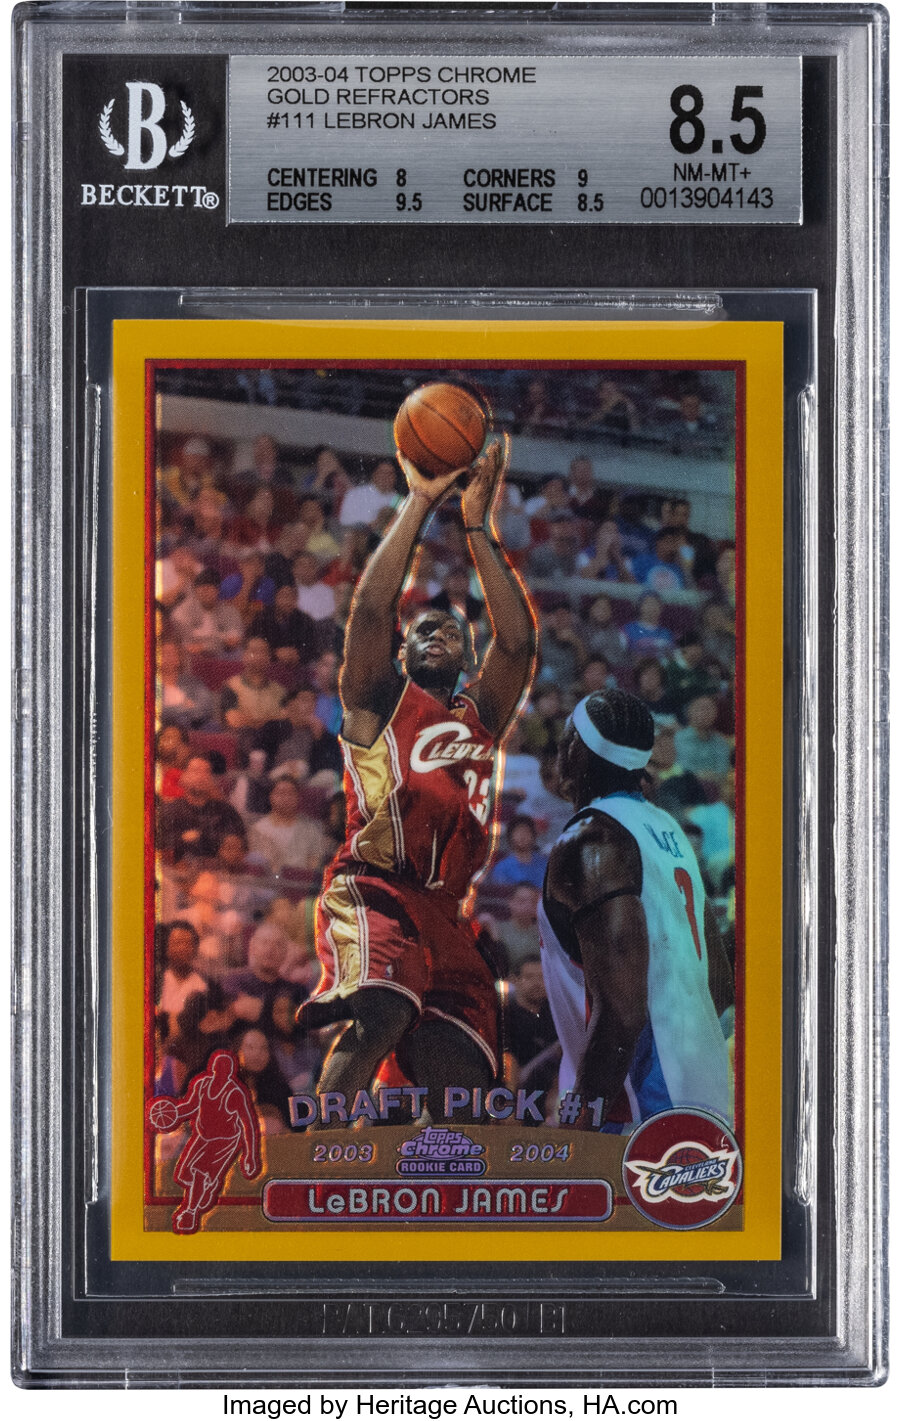 2003 Topps Chrome LeBron James Rookie (Gold Refractor) #111 BGS NM-MT+ 8.5 - #'d 43/50